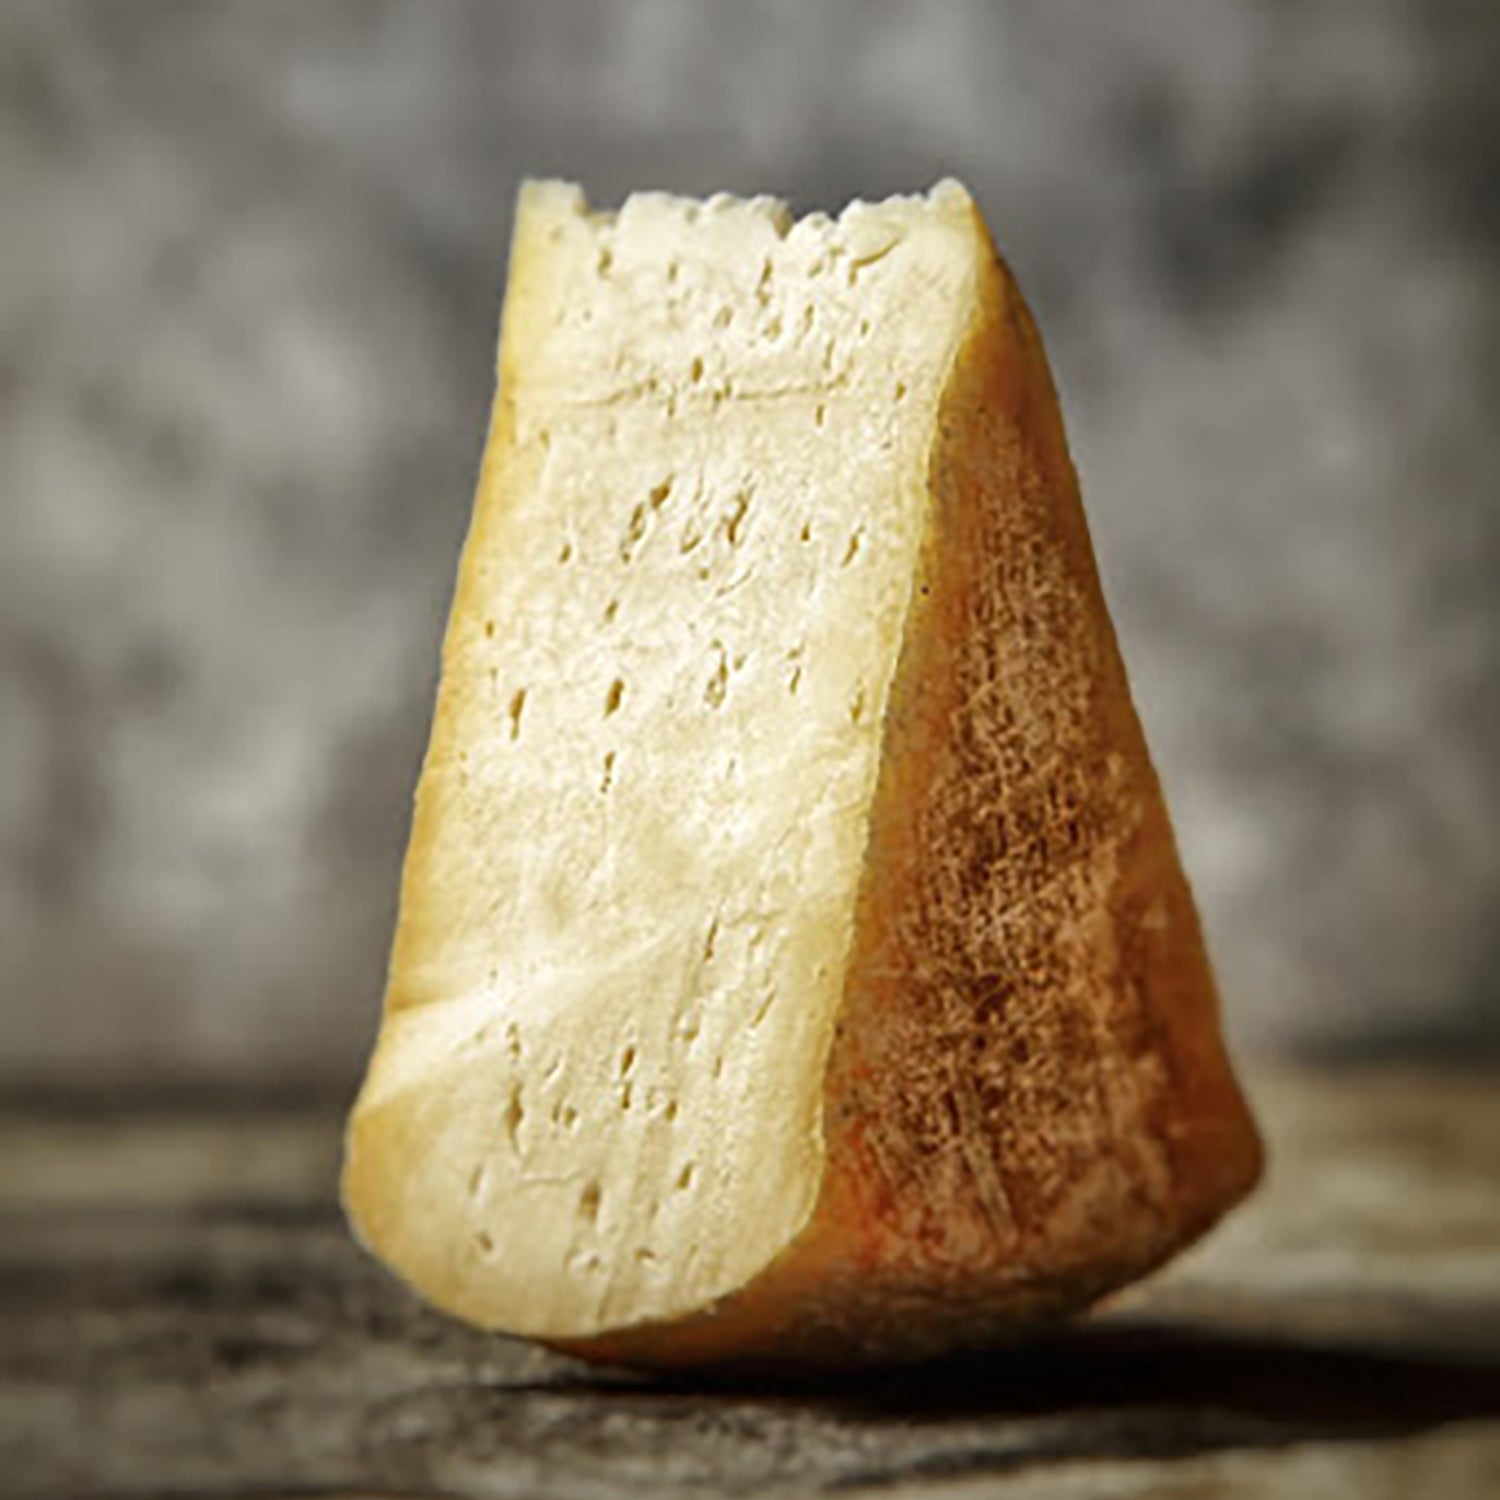 TOMME DE BOMBAI (The Spotted Cow Fromargerie)